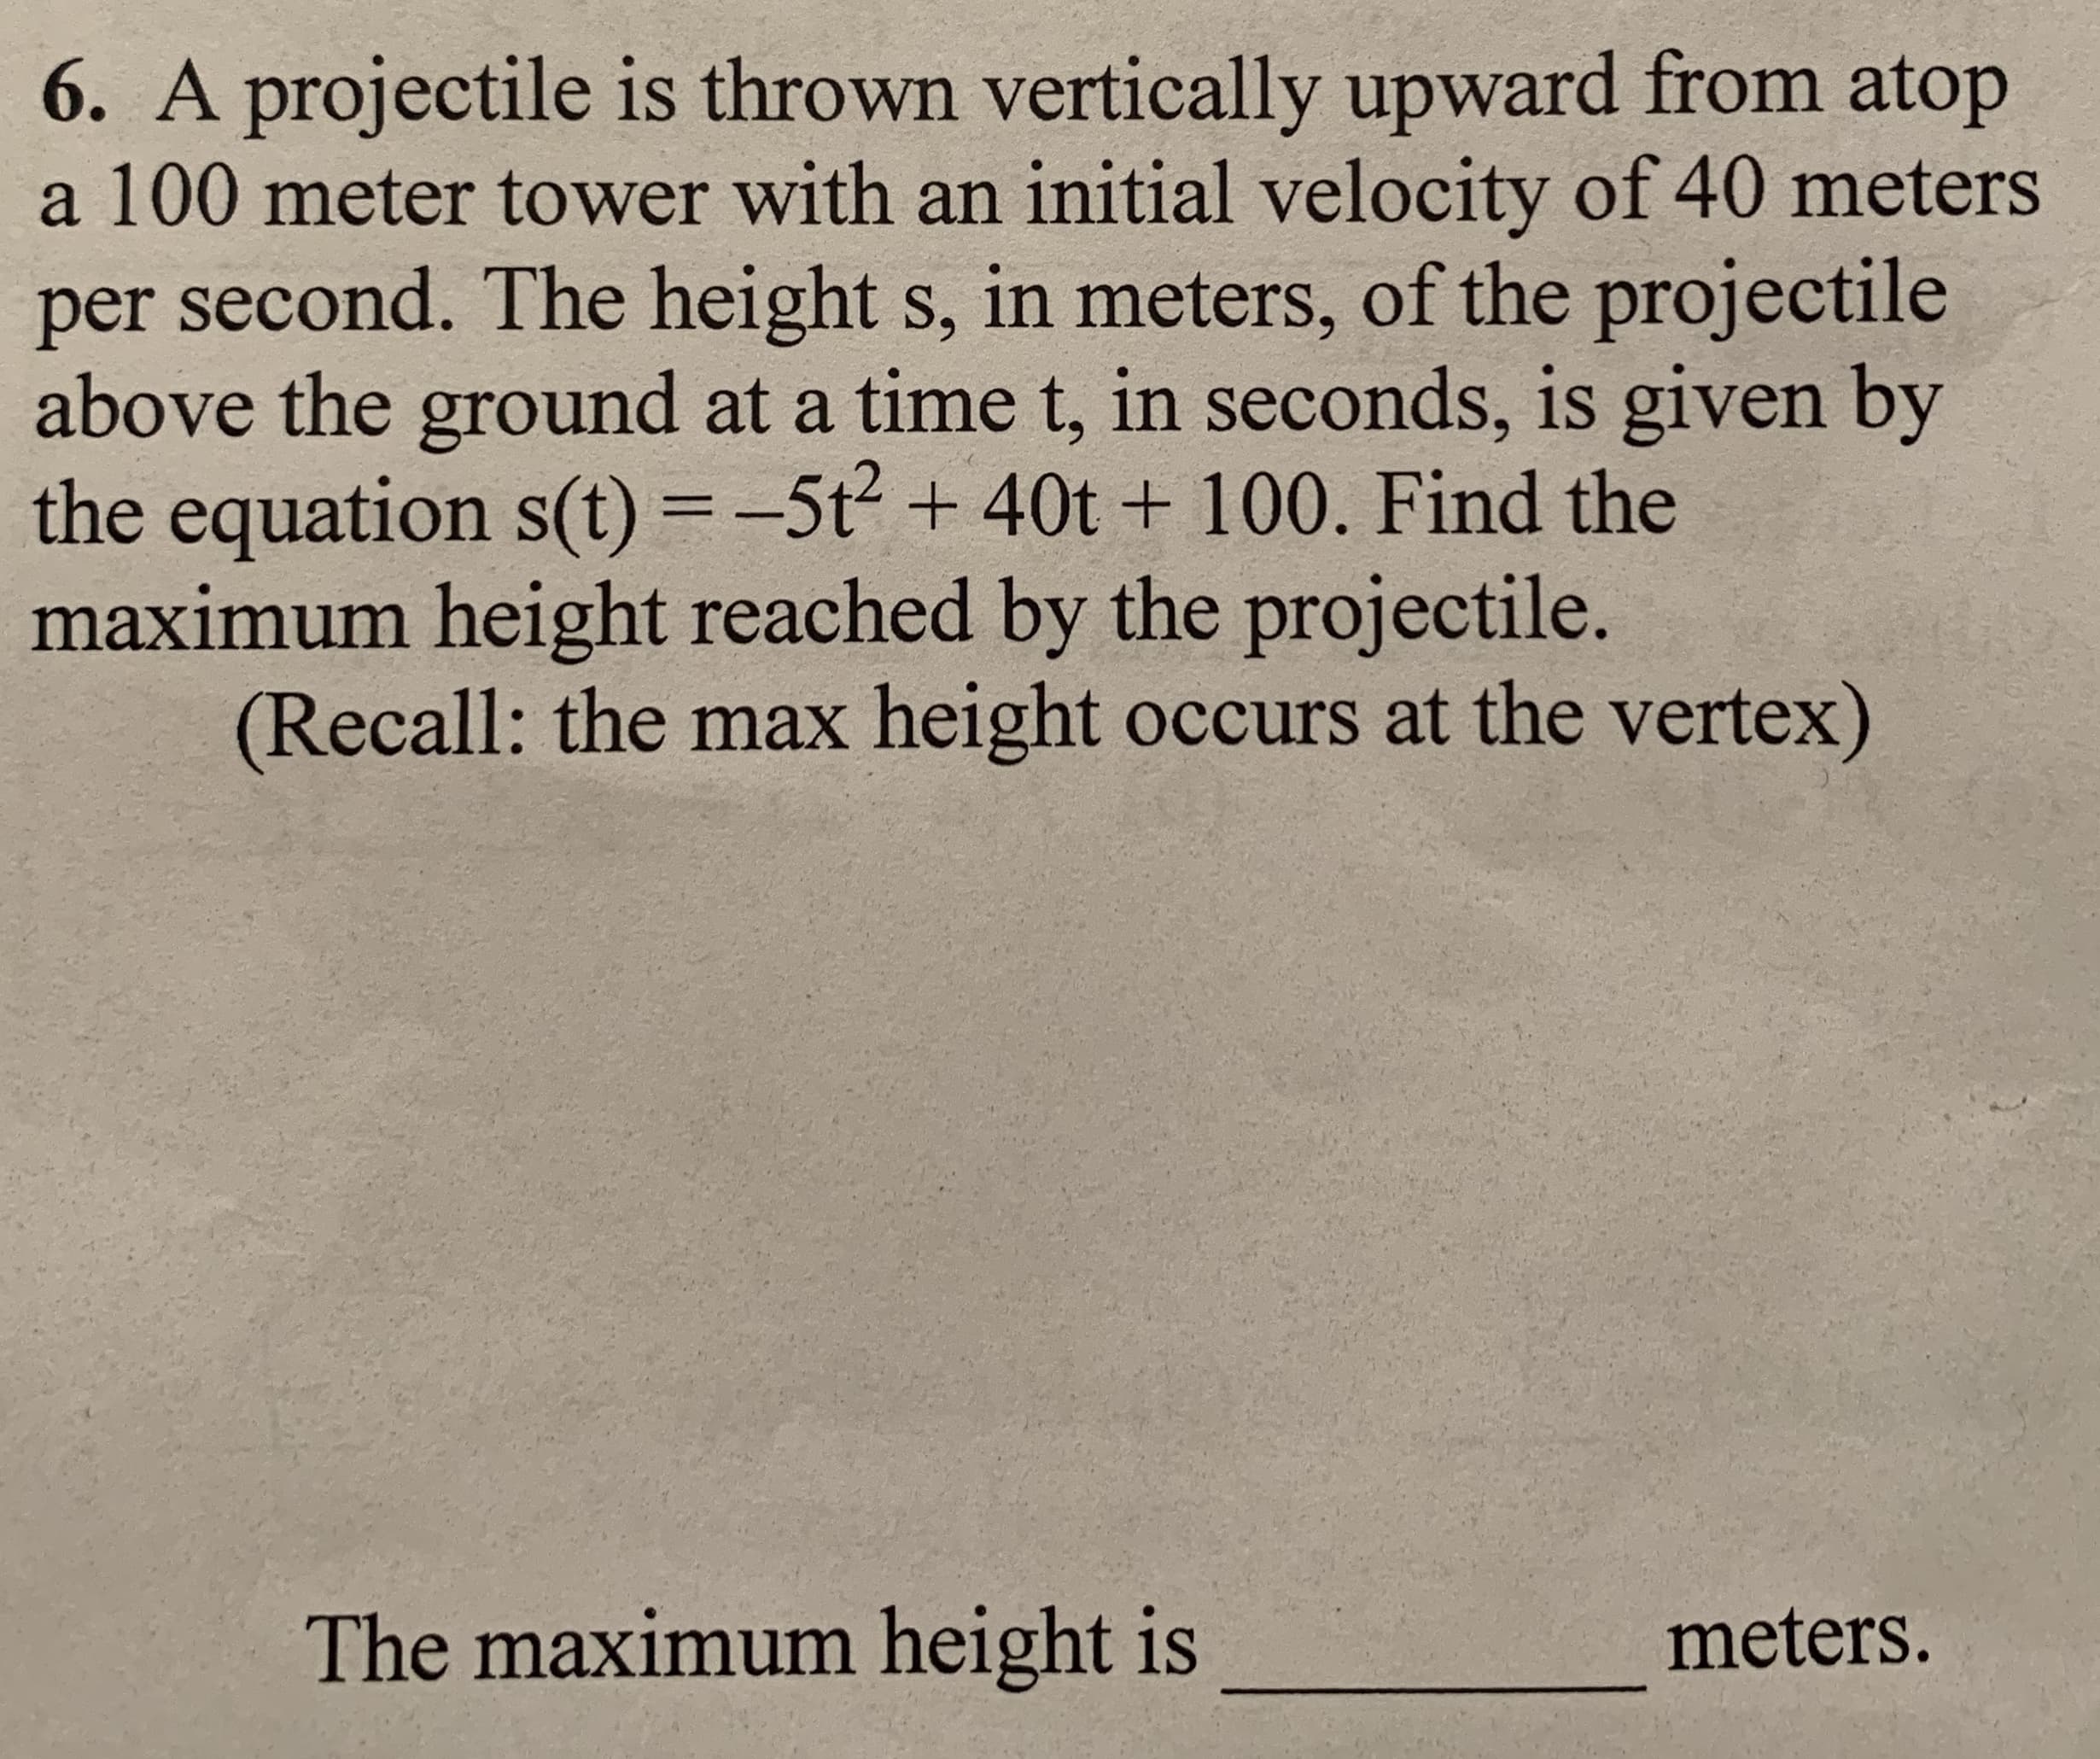 6. A projectile is thrown vertically upward from atop
a 100 meter tower with an initial velocity of 40 meters
per second. The height s, in meters, of the projectile
above the ground at a time t, in seconds, is given by
the equation s(t) = -5t2 + 40t + 100. Find the
maximum height reached by the projectile.
(Recall: the max height occurs at the vertex)
%3D
The maximum height is
meters.
